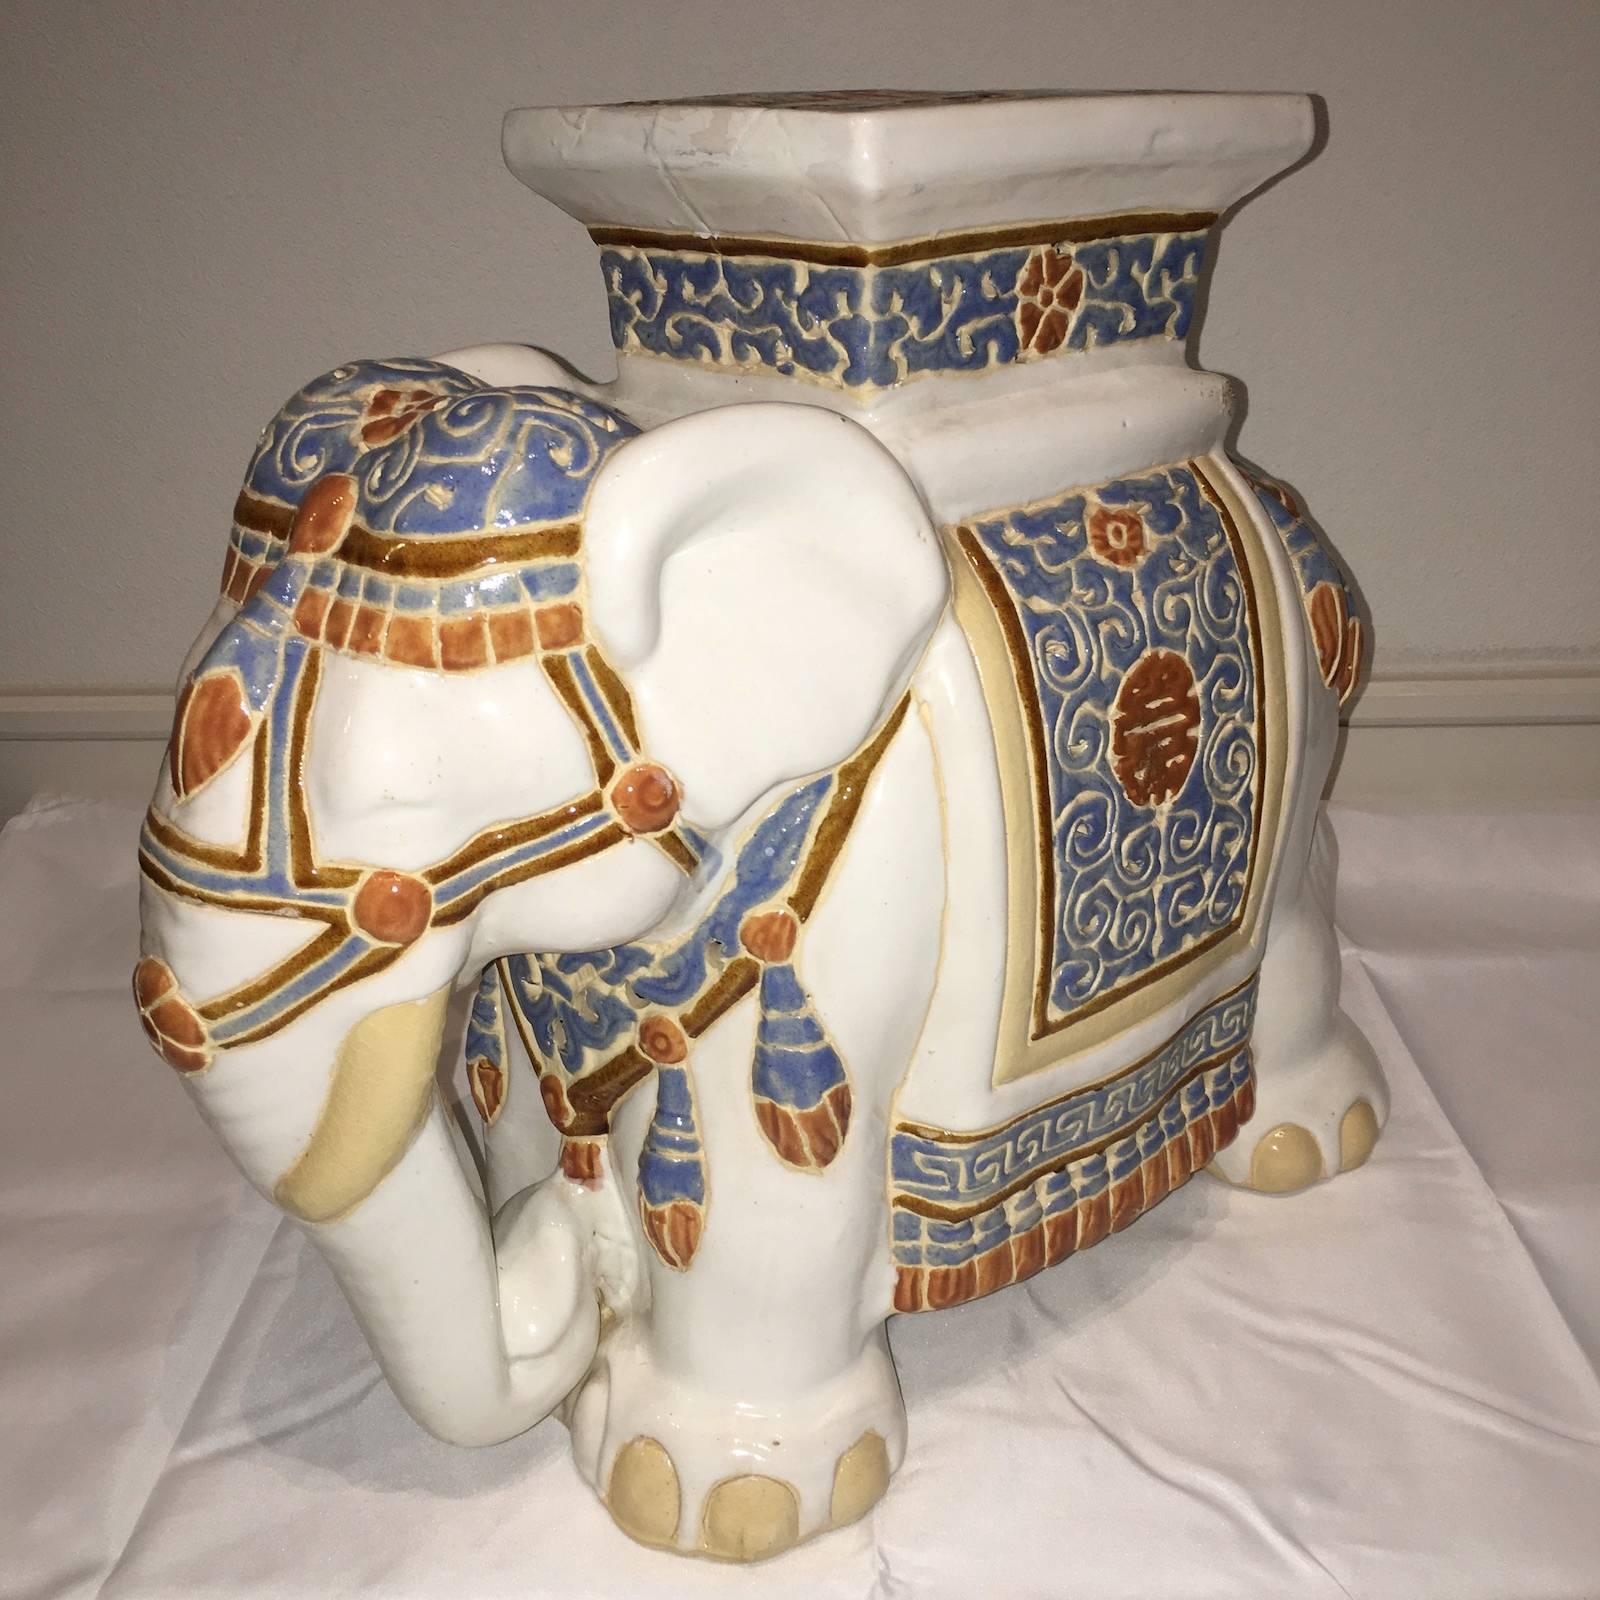 Mid-20th century glazed ceramic elephant garden stool, flower pot seat or side table. Handmade of ceramic. Nice addition to your home, patio or garden.